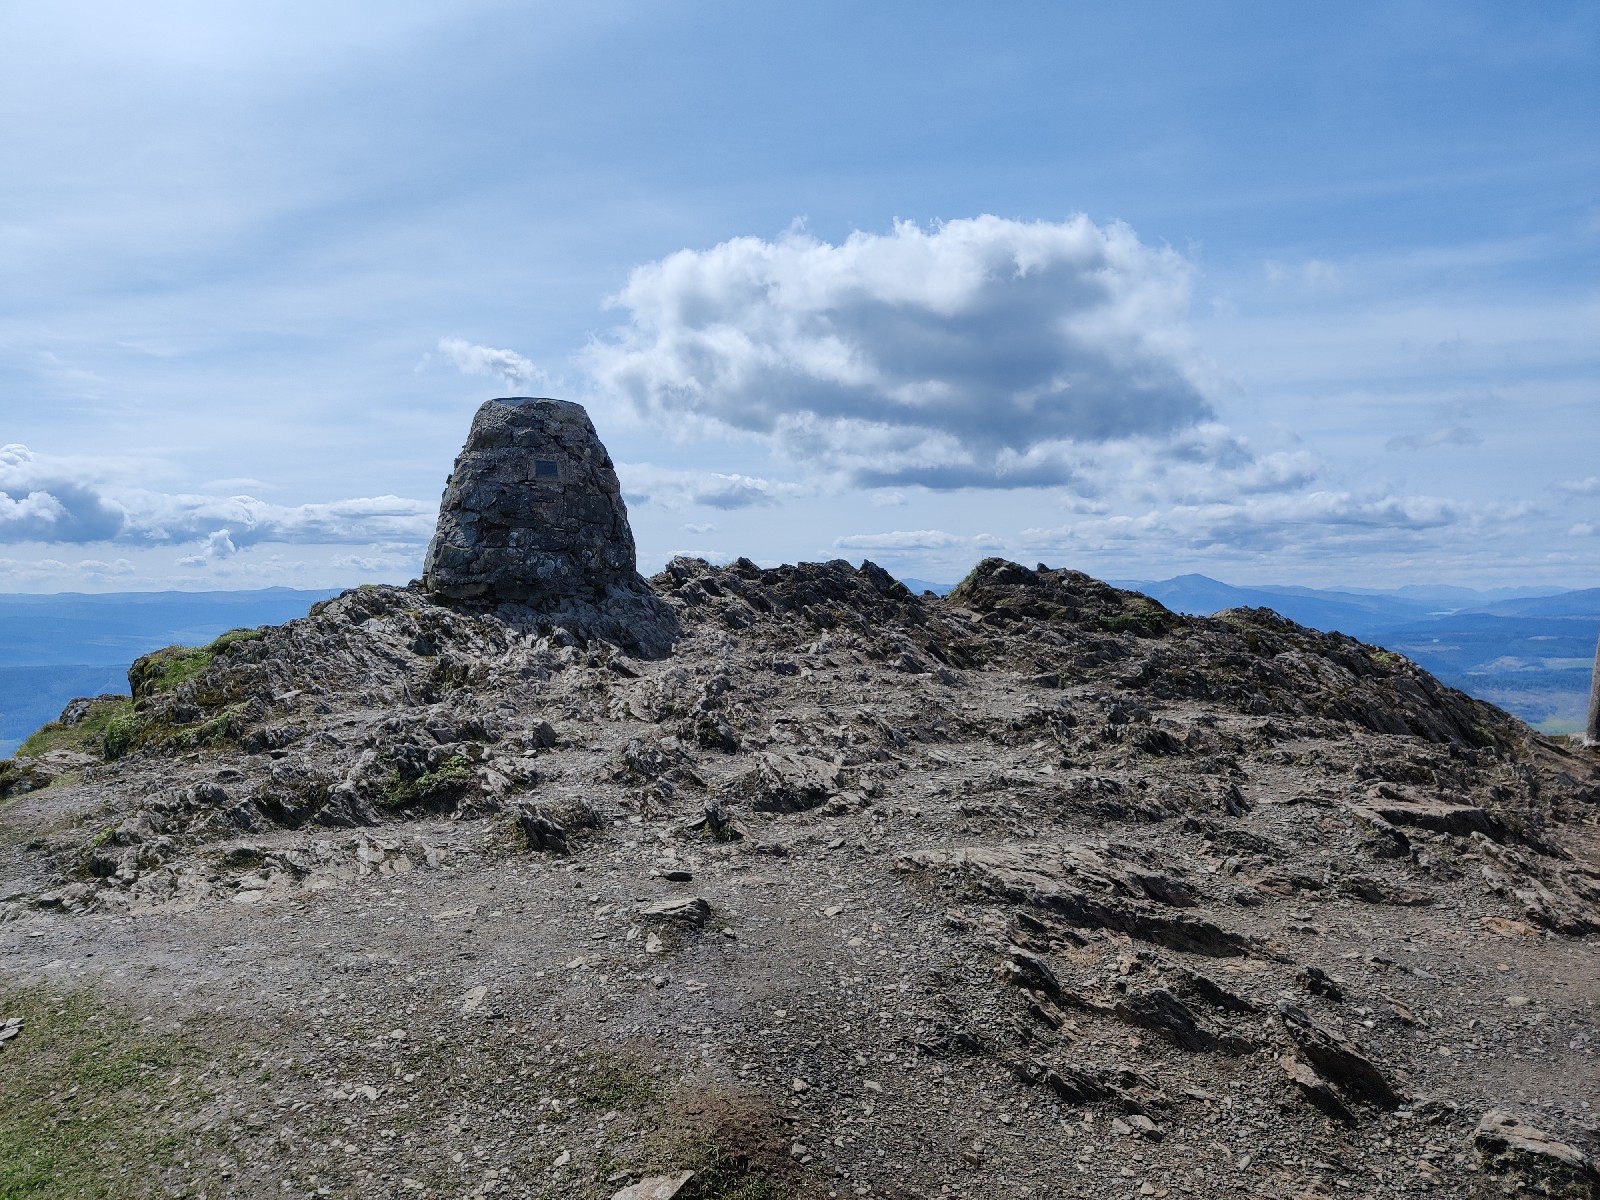 The summit marker at the top of the mountain on sharp bare rock